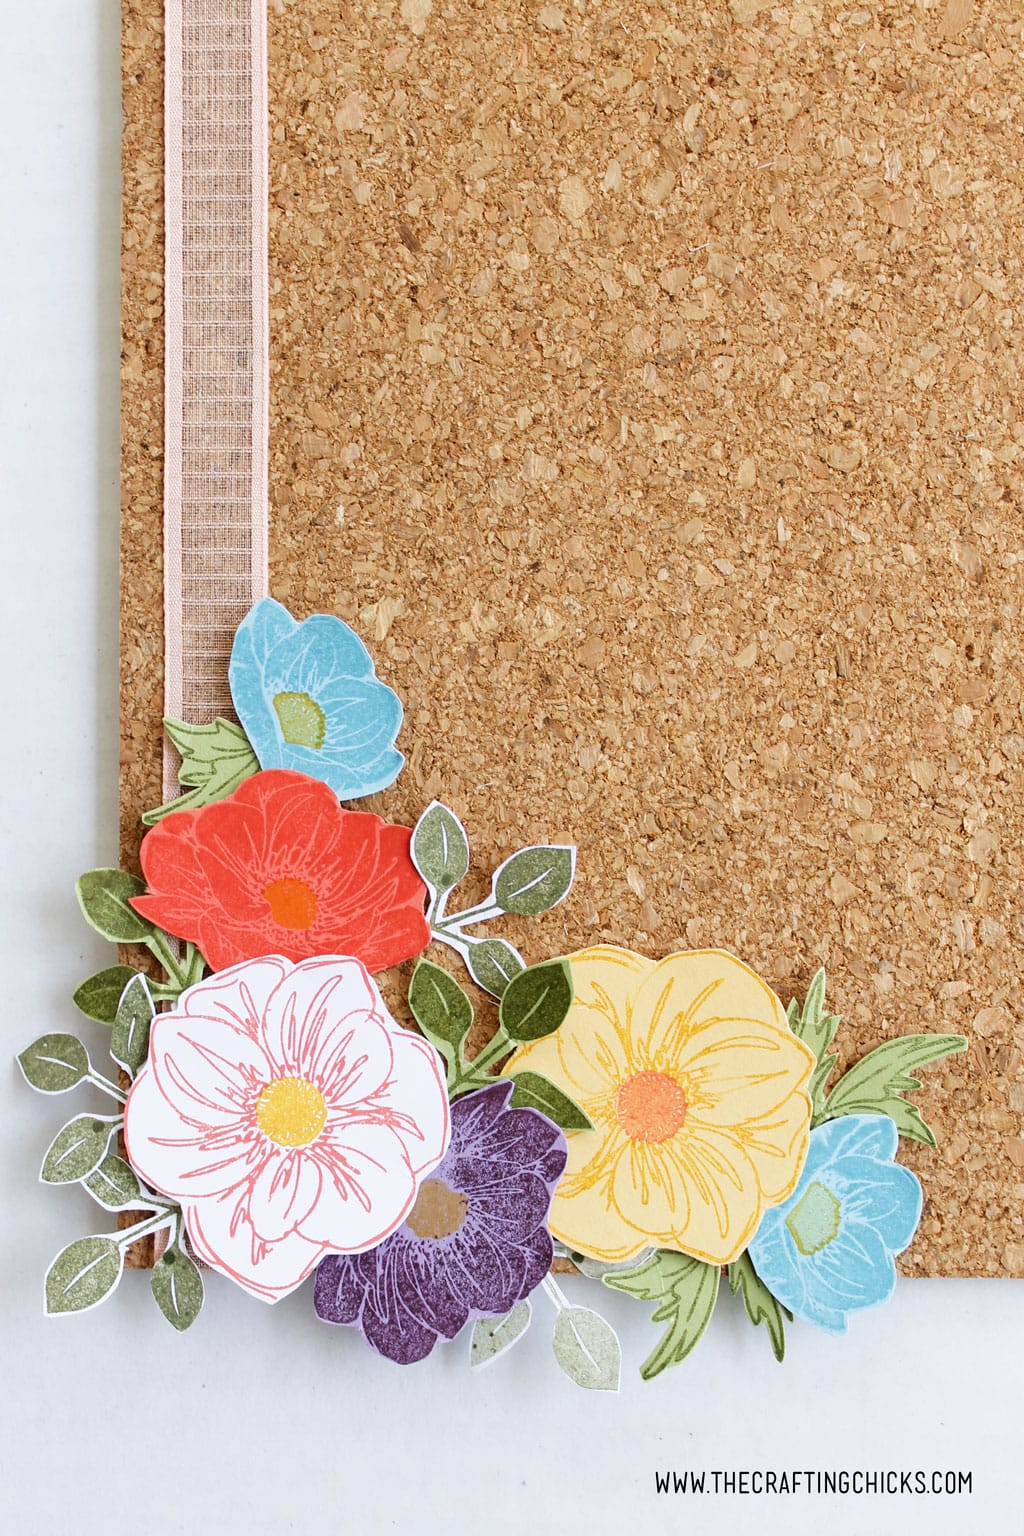 Layered stamped flowers on a cork board 